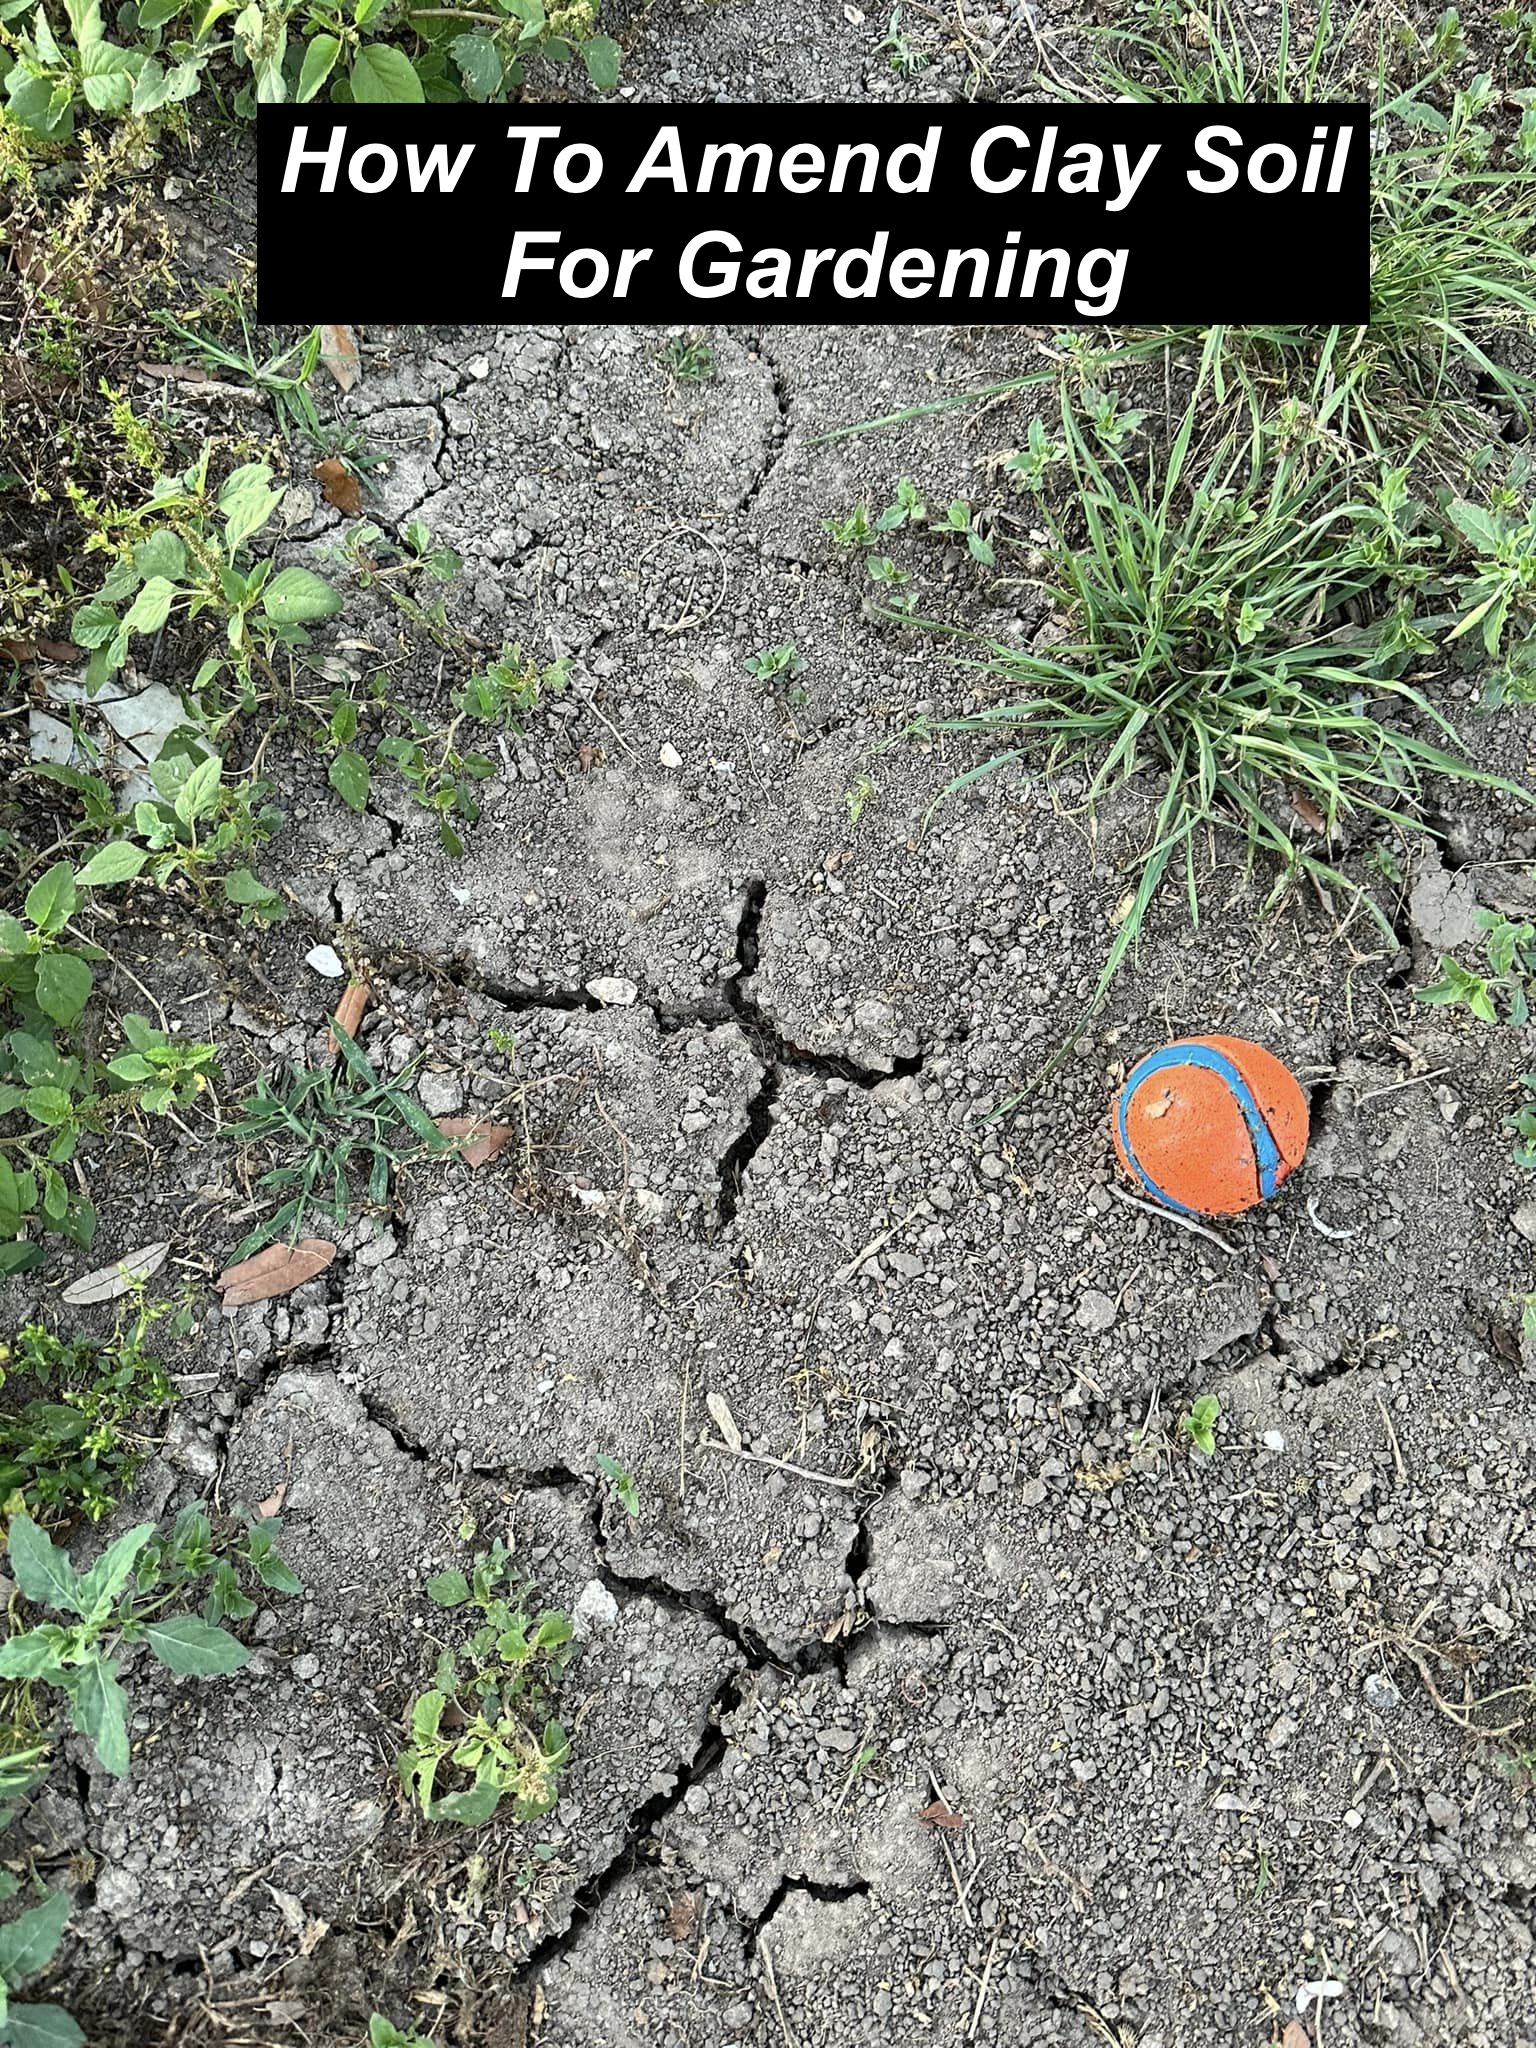 How To Amend Clay Soil For Gardening